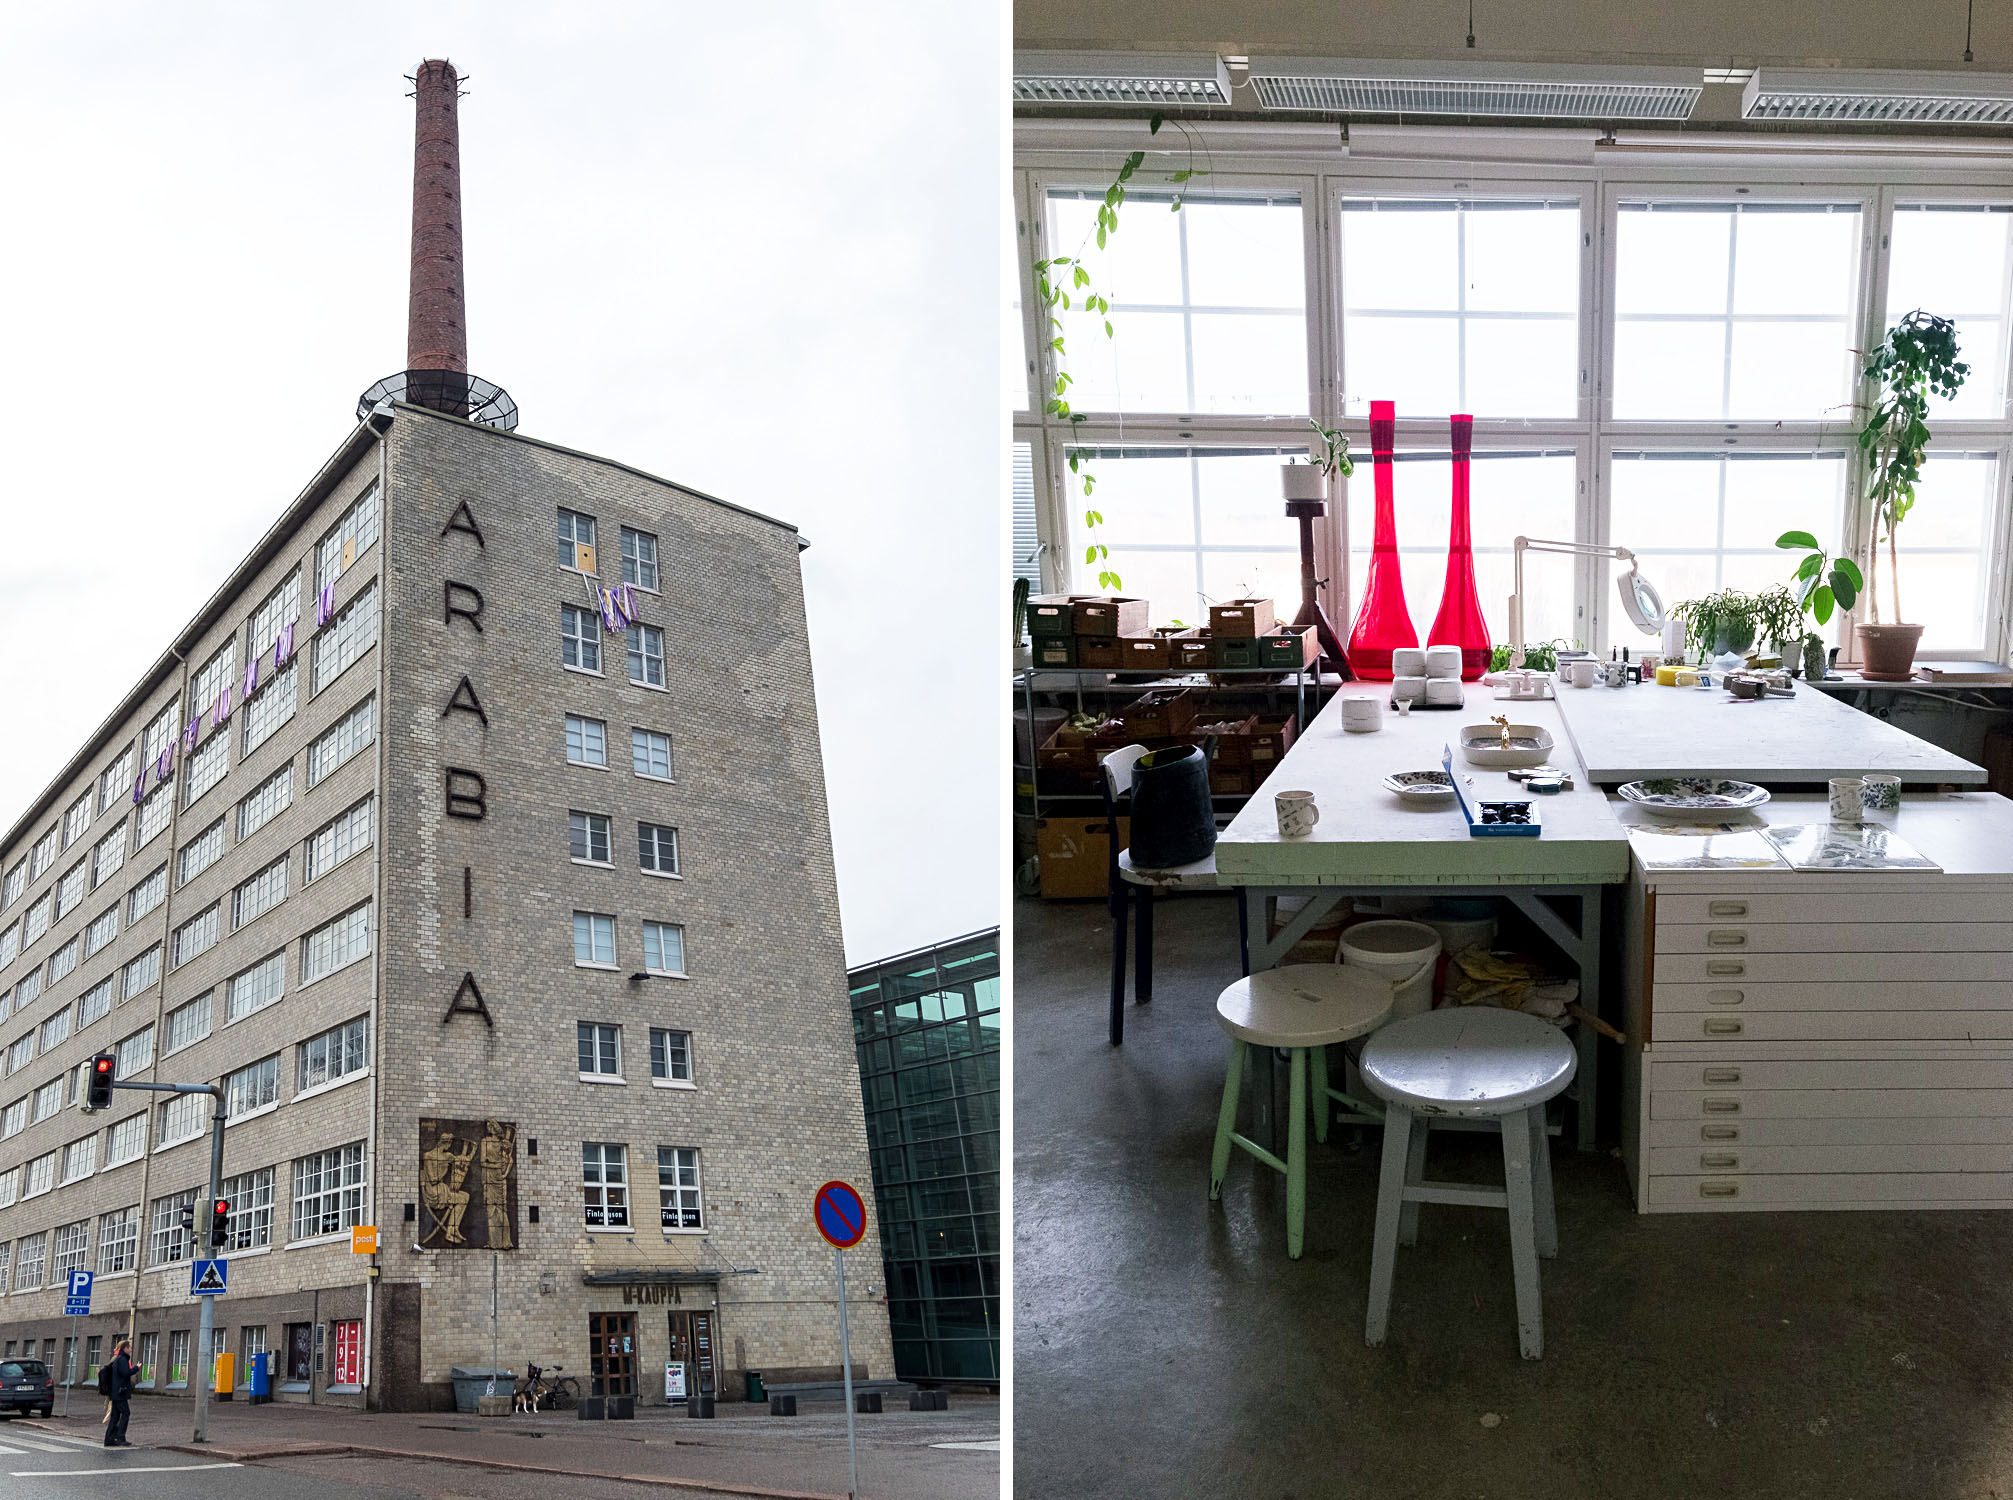 Arabia and Iittala Centre - Helsinki: A Two-Day City Guide to The Finnish Capital